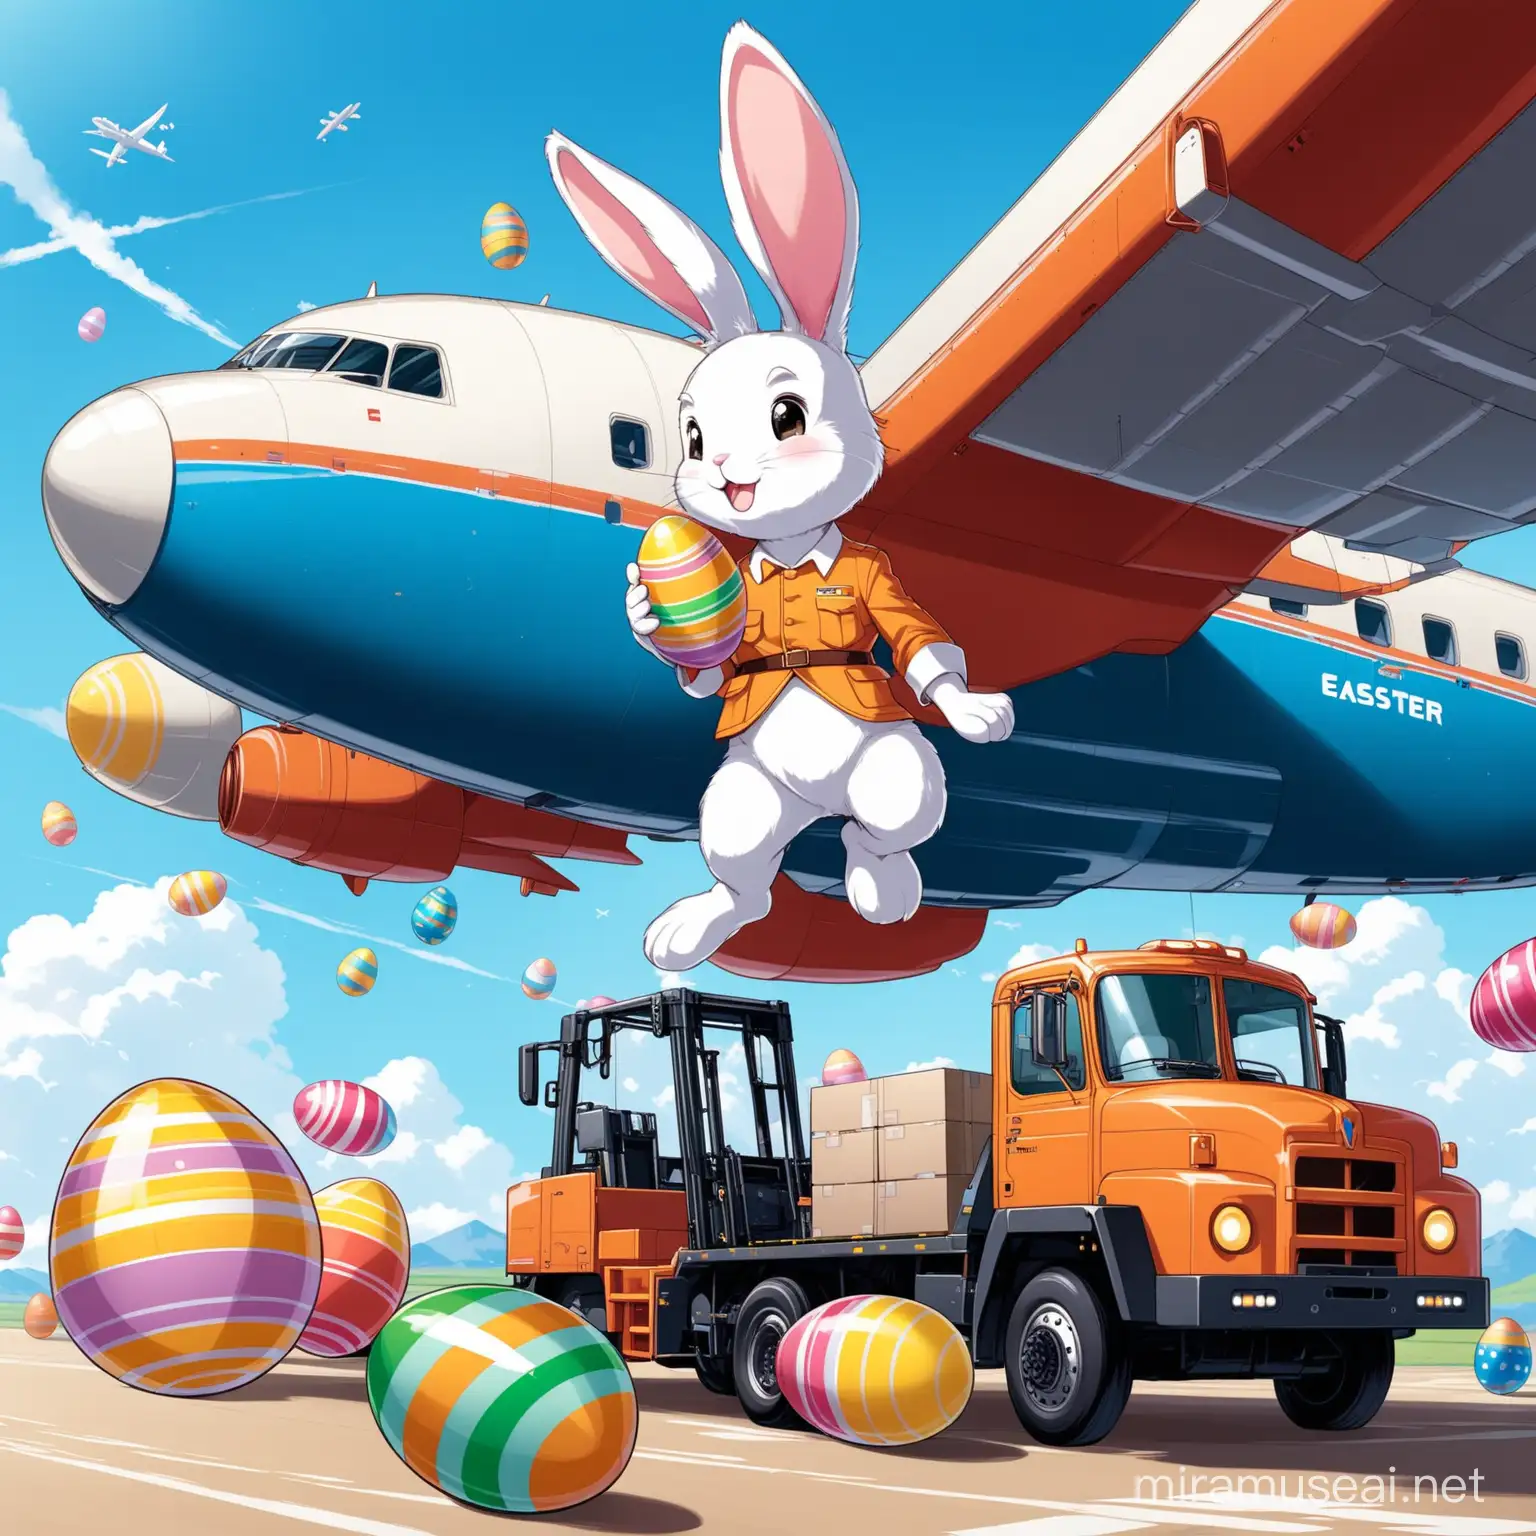 please draw me an image of  a bunny  in Uniform loading easter eggs into an aircrafts / trucks I want to send it as a Greeting from Index Logistics on Easter 
